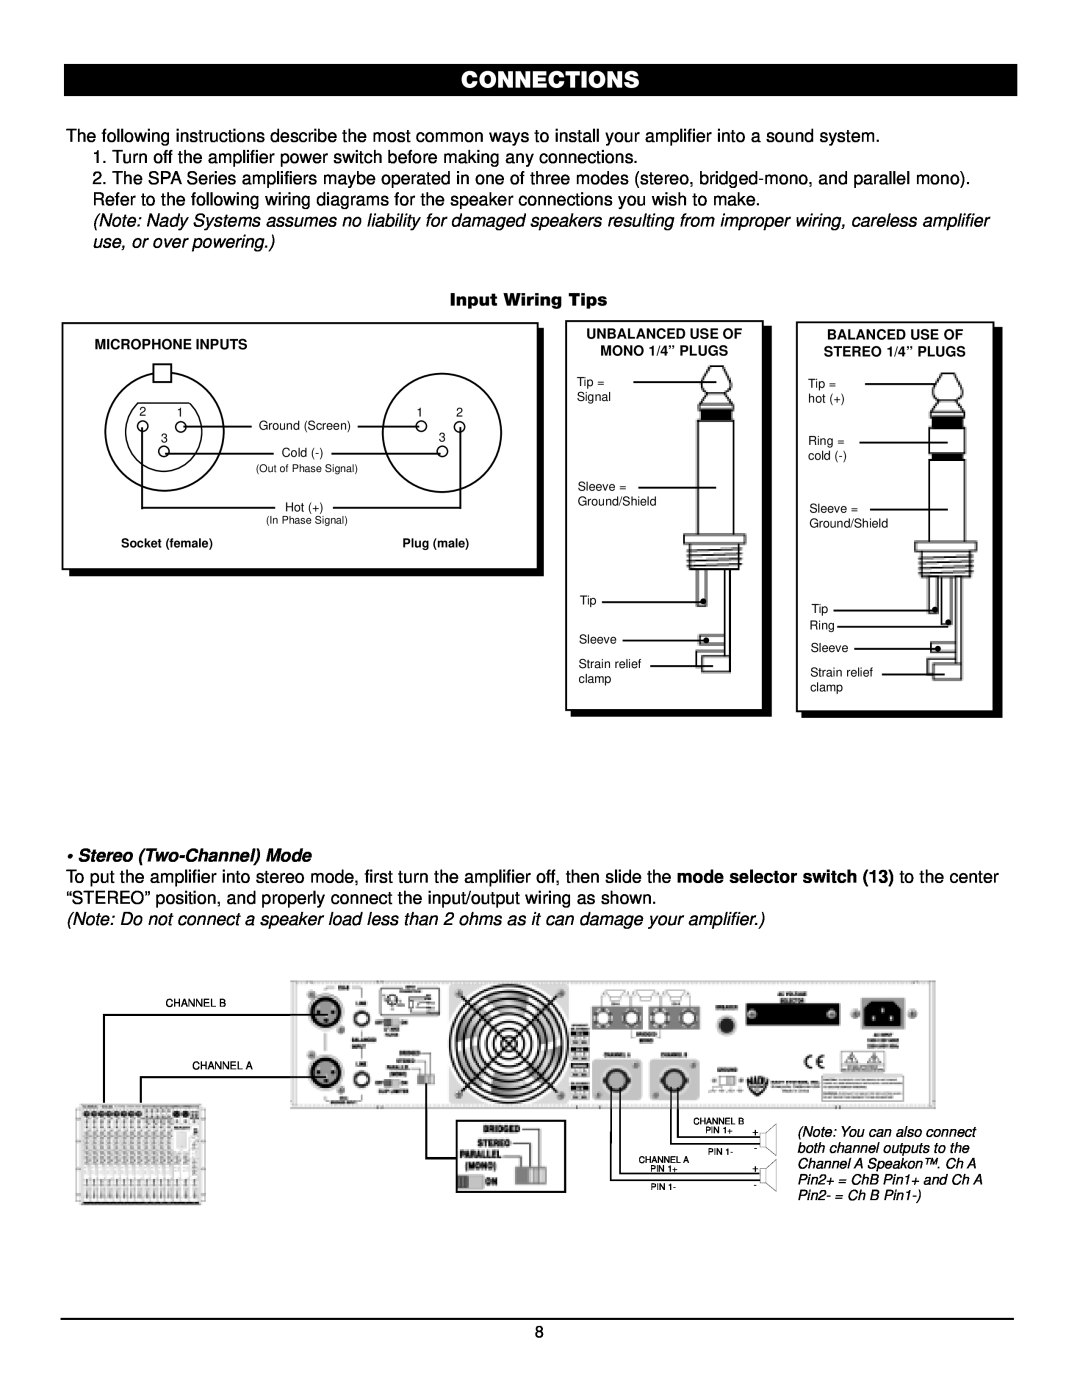 Nady Systems SPA 1400 owner manual Connections, Input Wiring Tips, Stereo Two-ChannelMode 